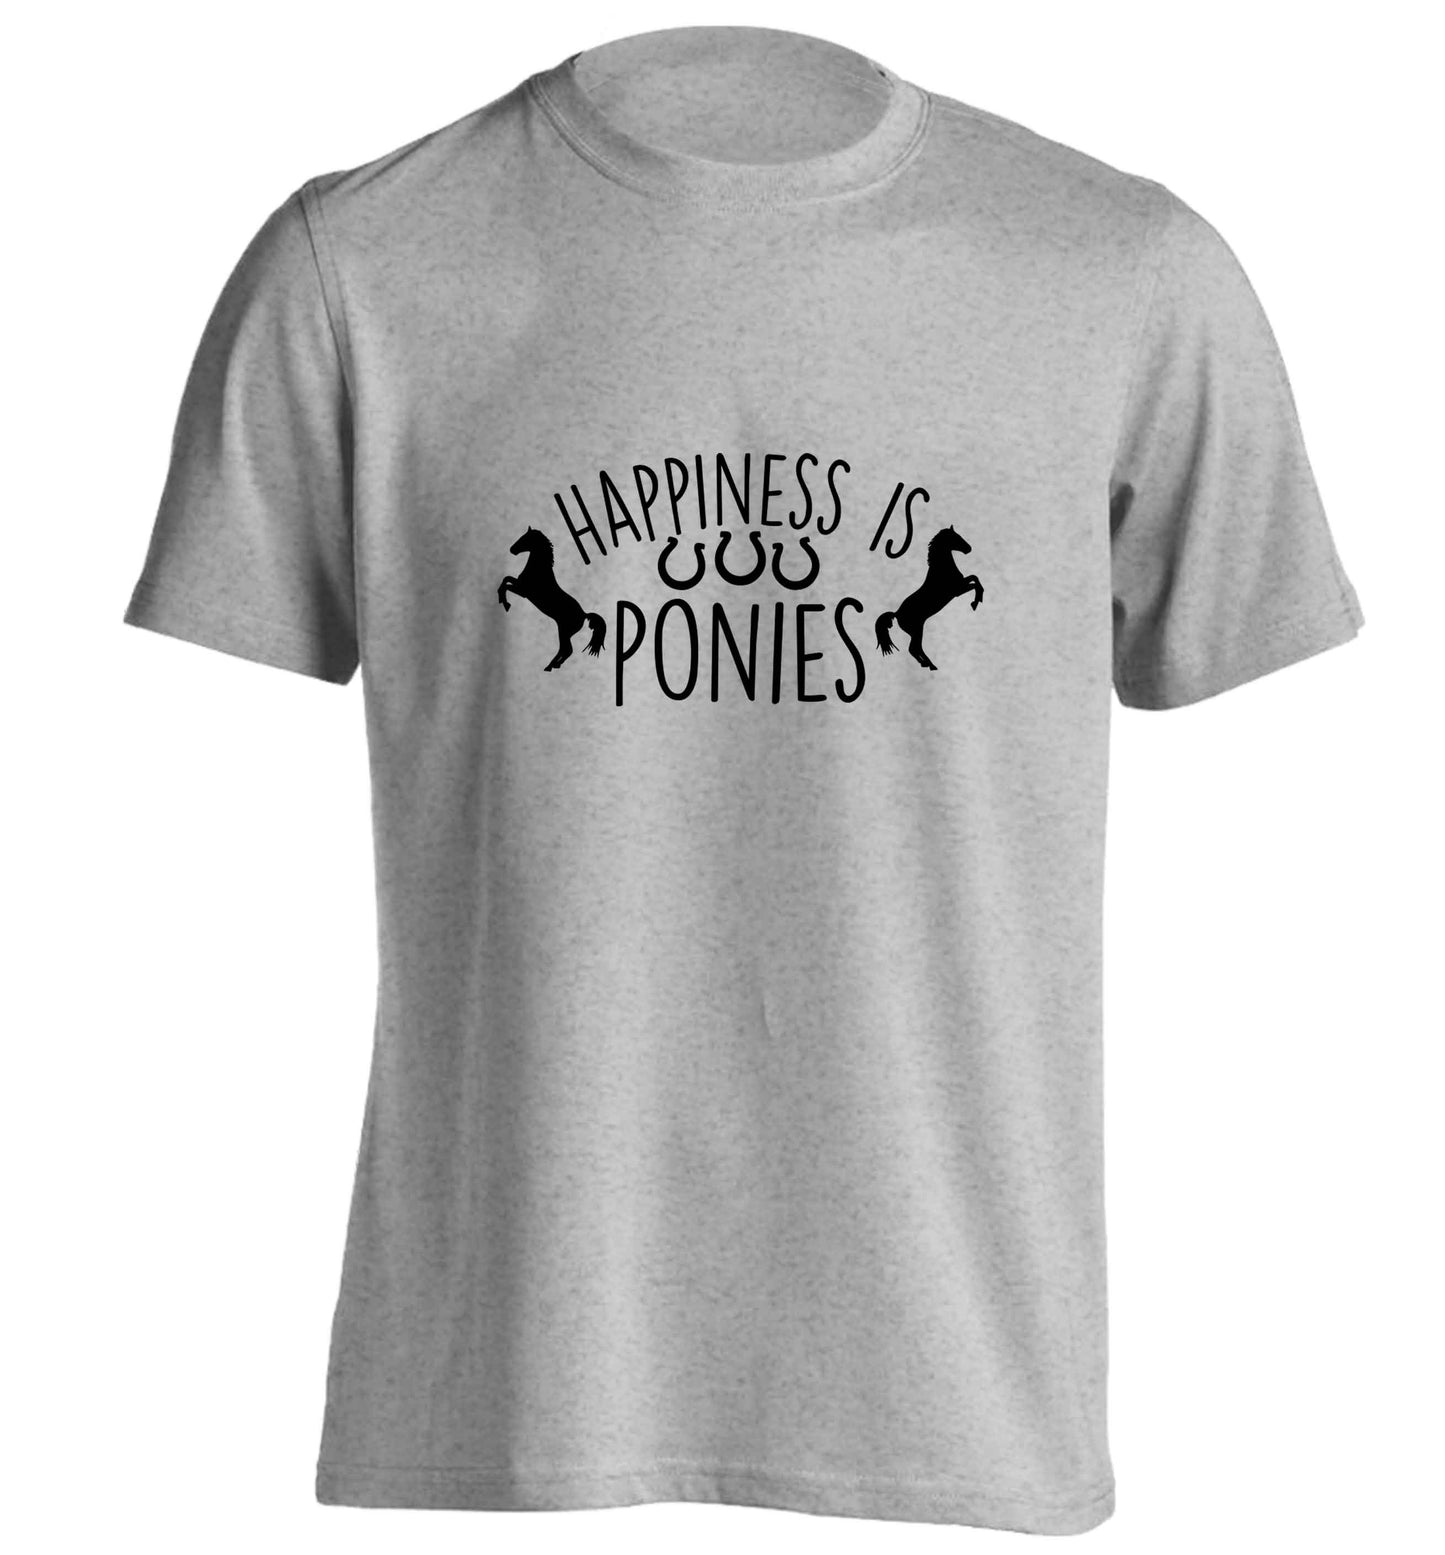 Happiness is ponies adults unisex grey Tshirt 2XL